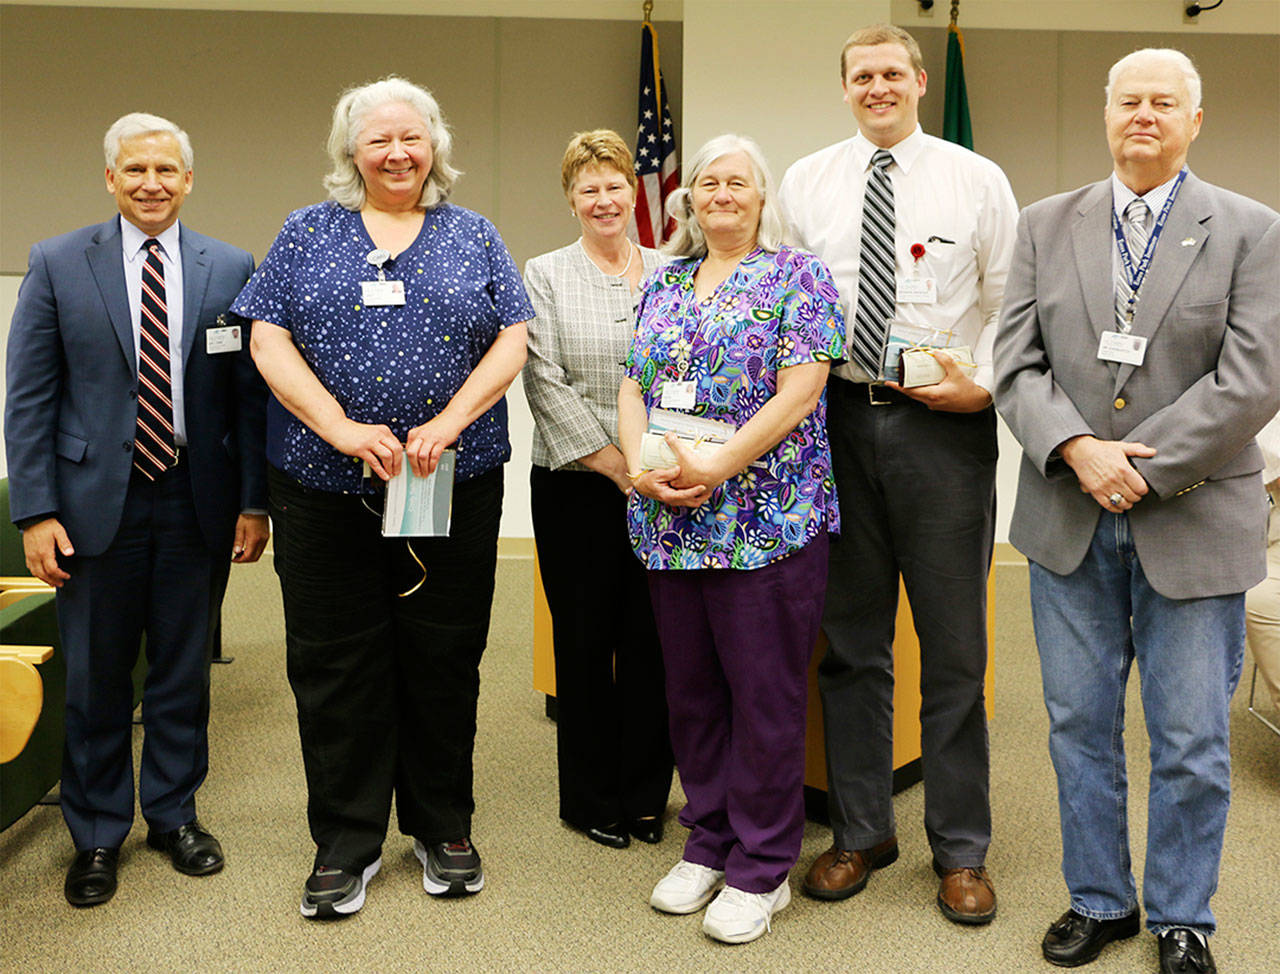 From left are Eric Lewis, Cindy Seifert, Lorraine Wall, Vickie DeMott, Brandon Snedeger and Jim Leskinovitch, board president. Not pictured are Cheri Levy and Maia Cosio.